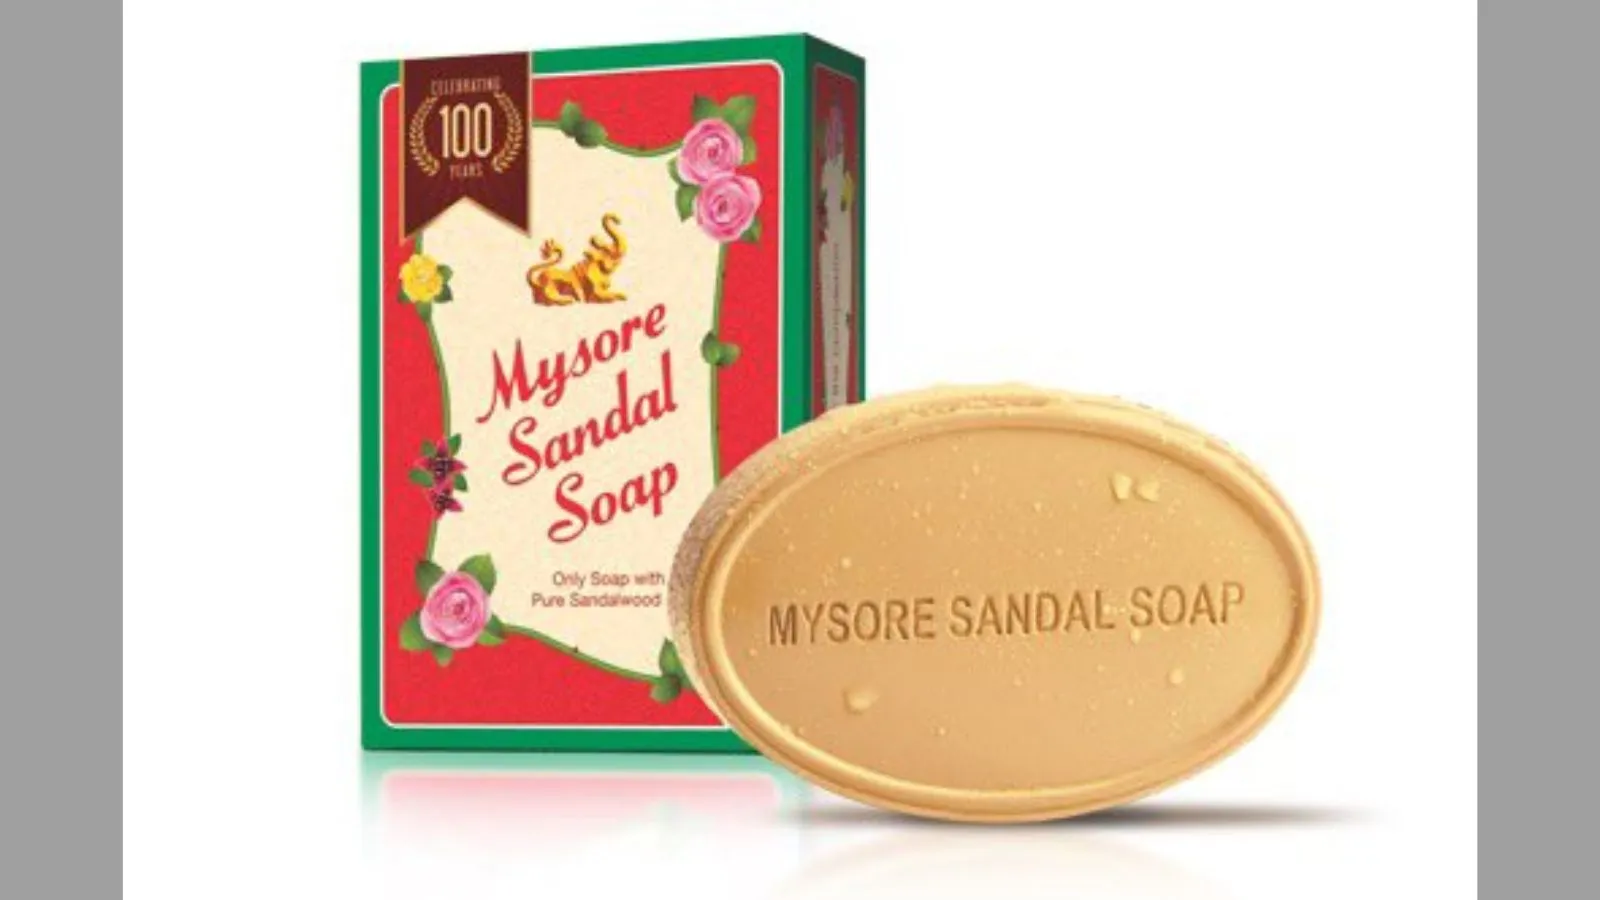 Fake Mysore Sandal Soap unit in Hyderabad: Priyank Kharge says BJP leaders  selling Karnataka assets - The South First